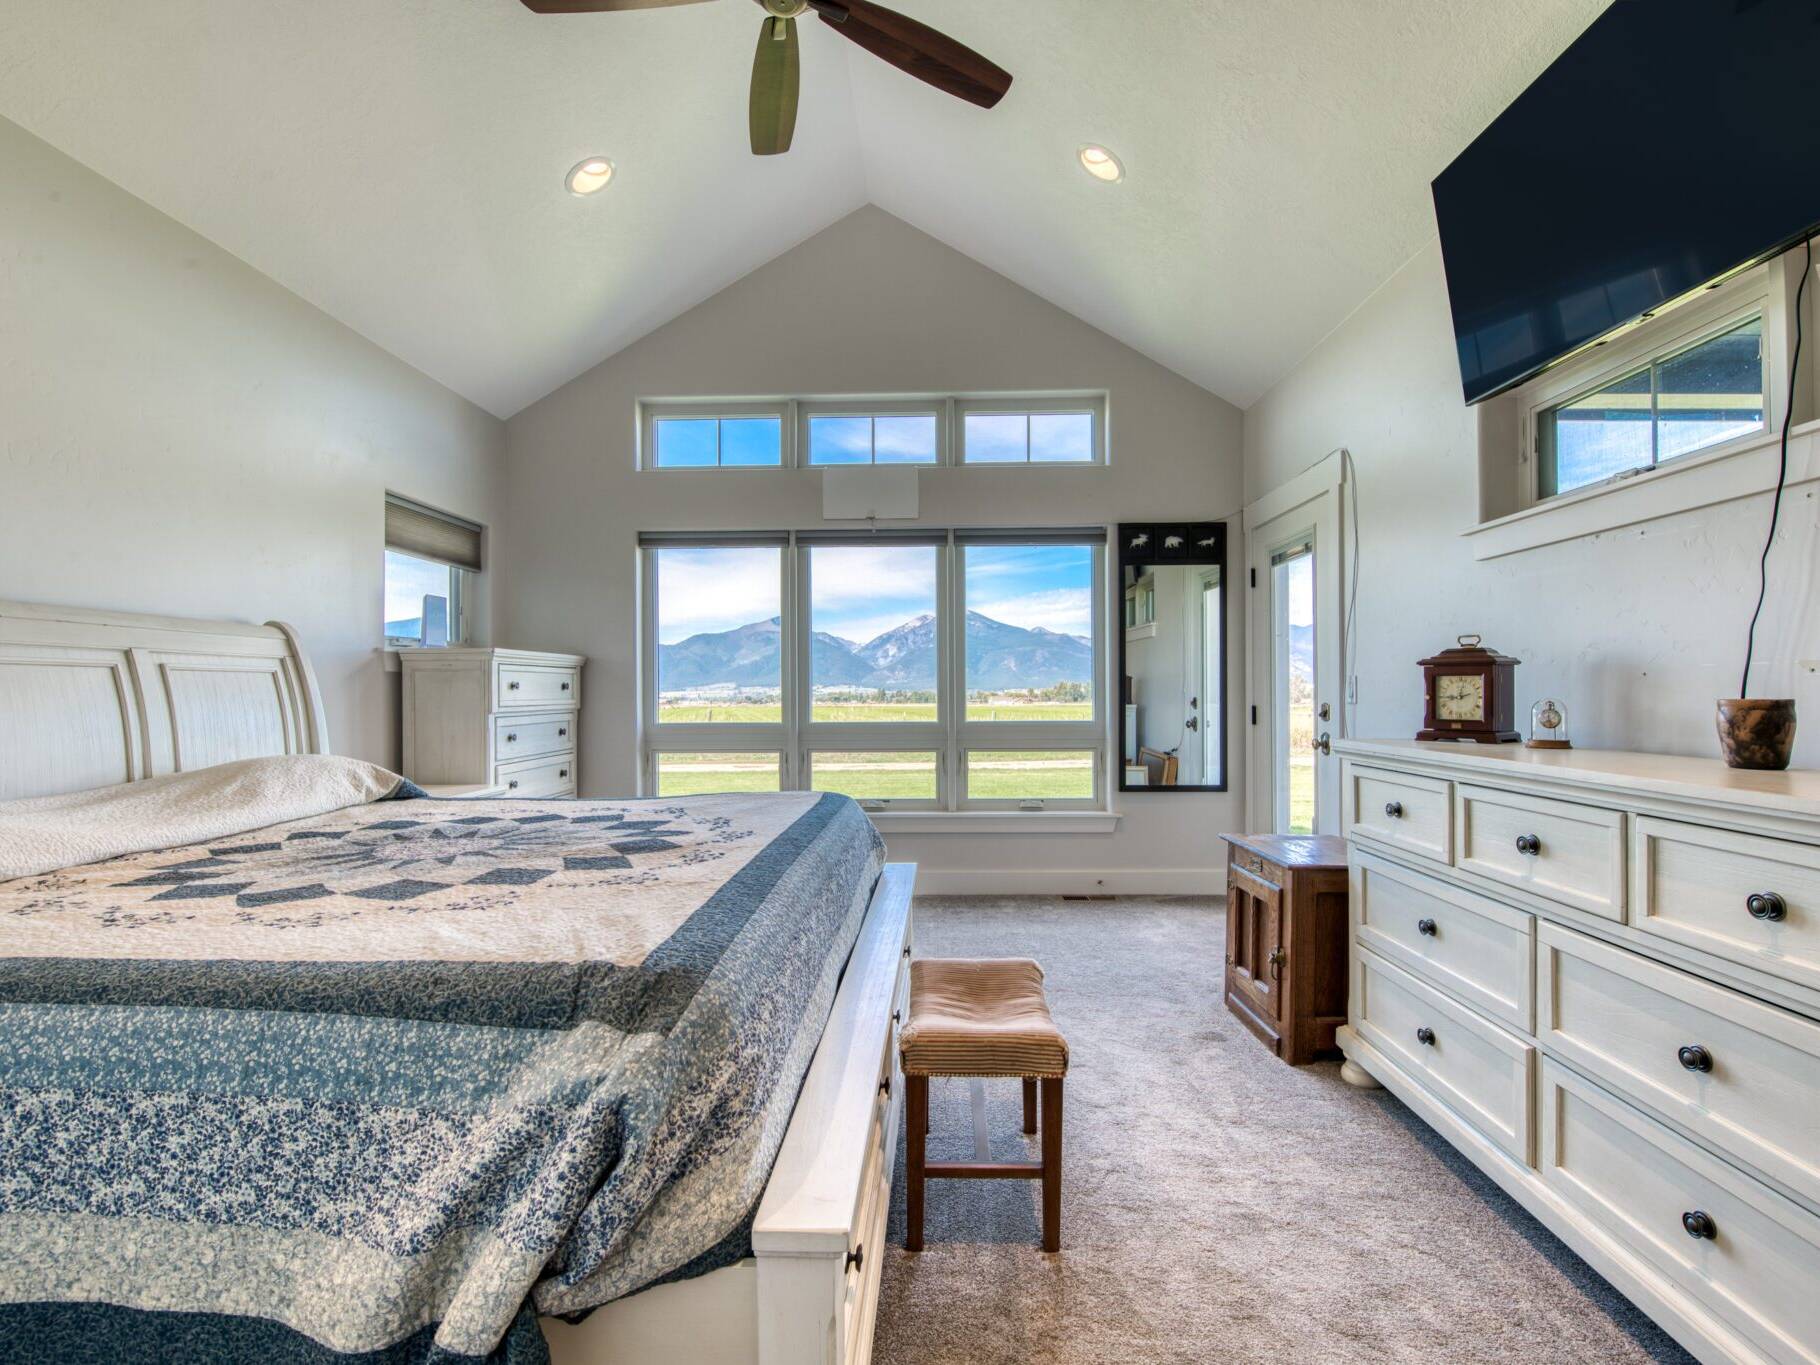 Master bedroom with a vaulted ceiling, carpet floors, and large windows in a custom home built by Big Sky Builders in Stevensville, MT